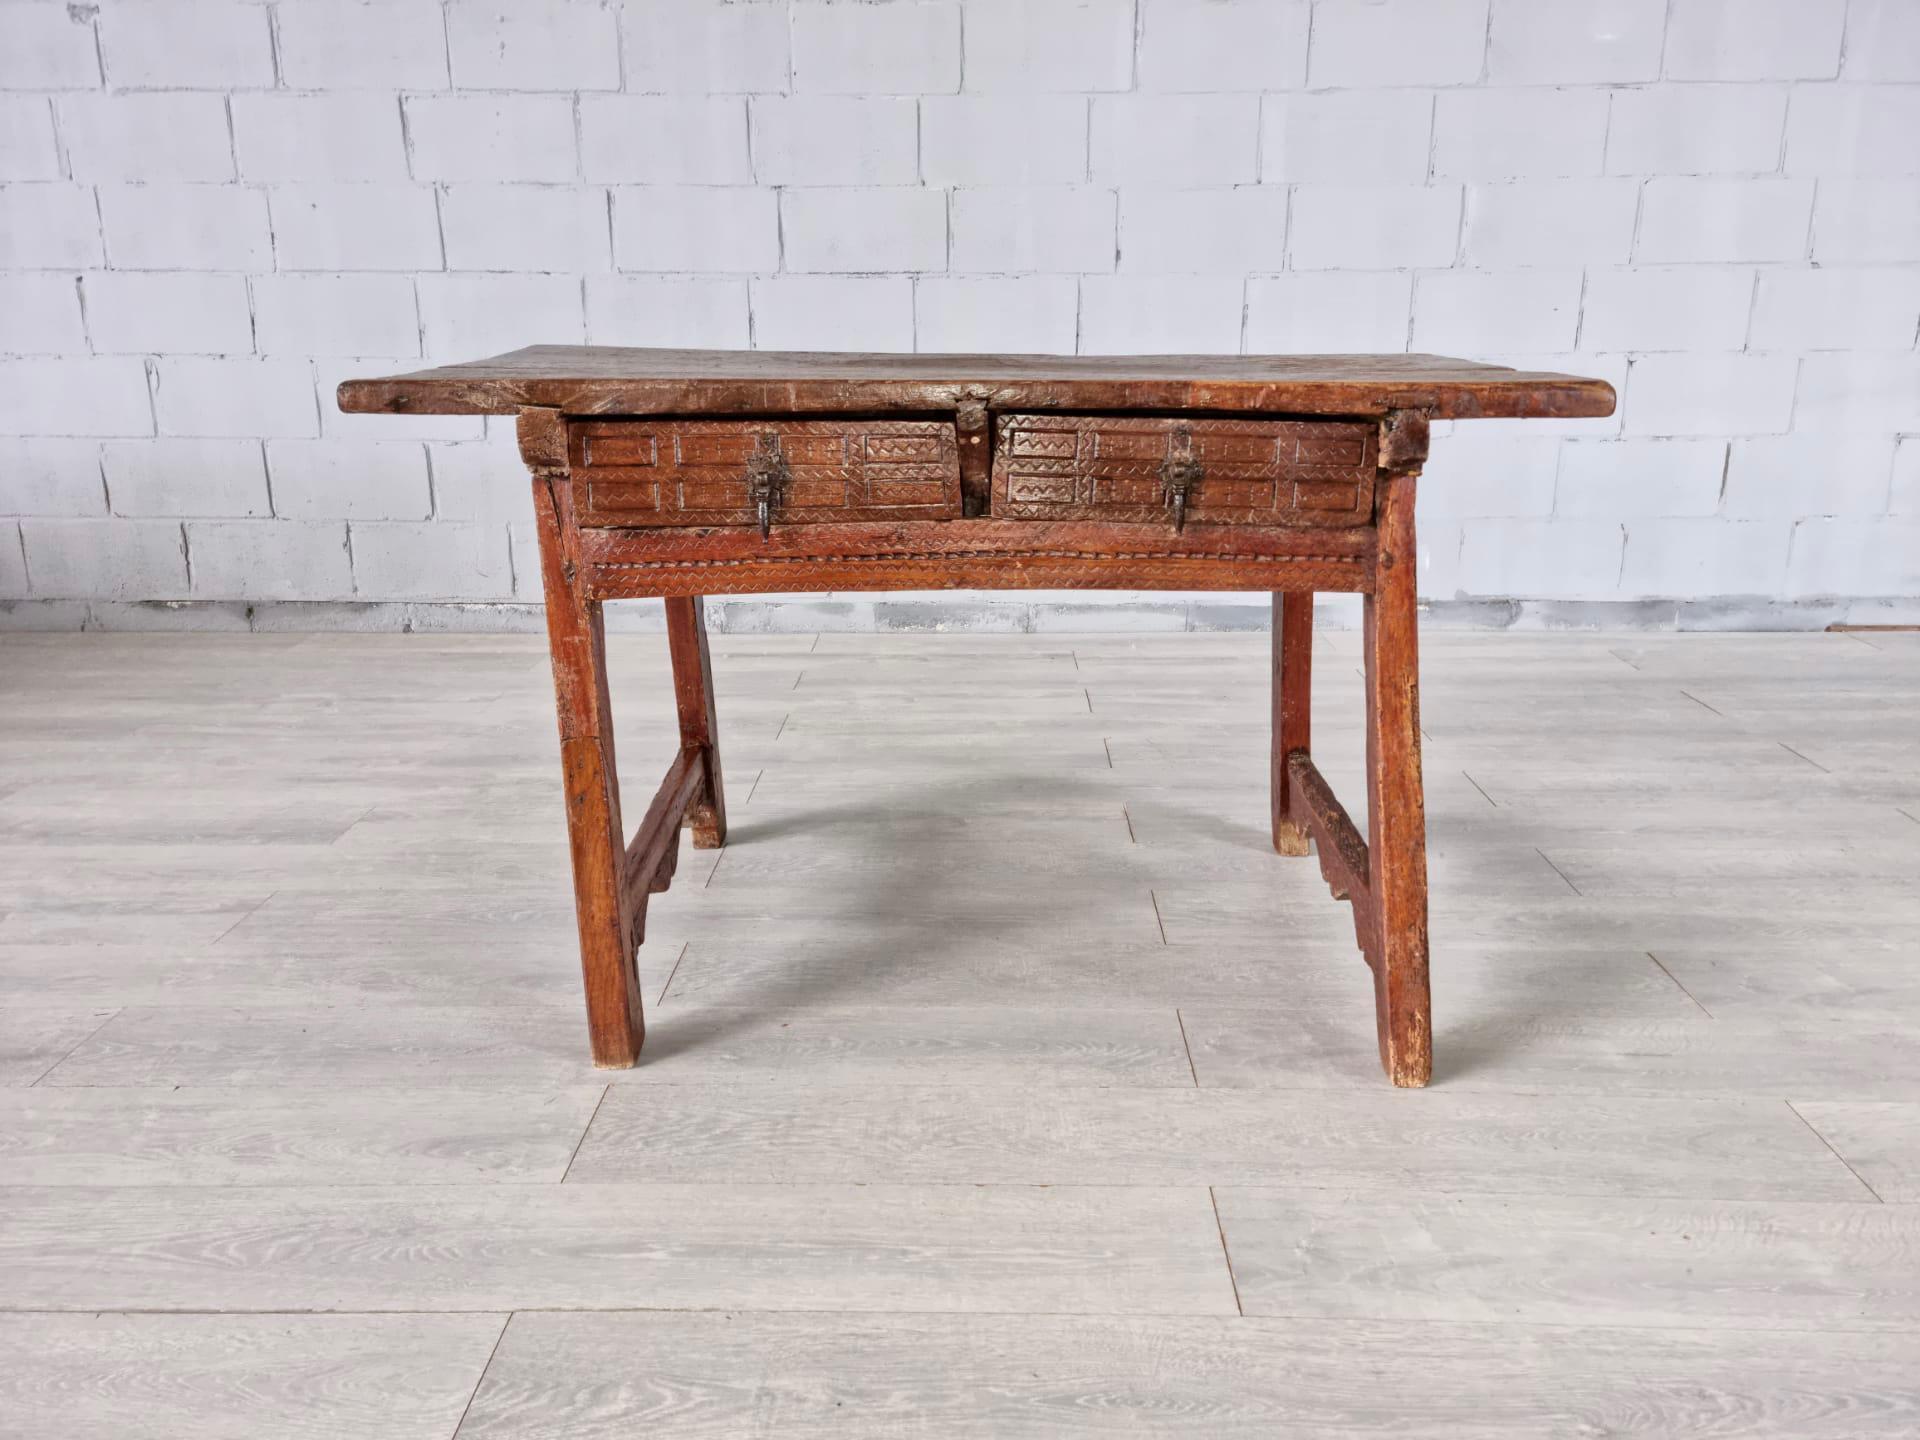 Antique 18th Century Spanish Walnut Desk or Small Table In Fair Condition For Sale In Bridgeport, CT